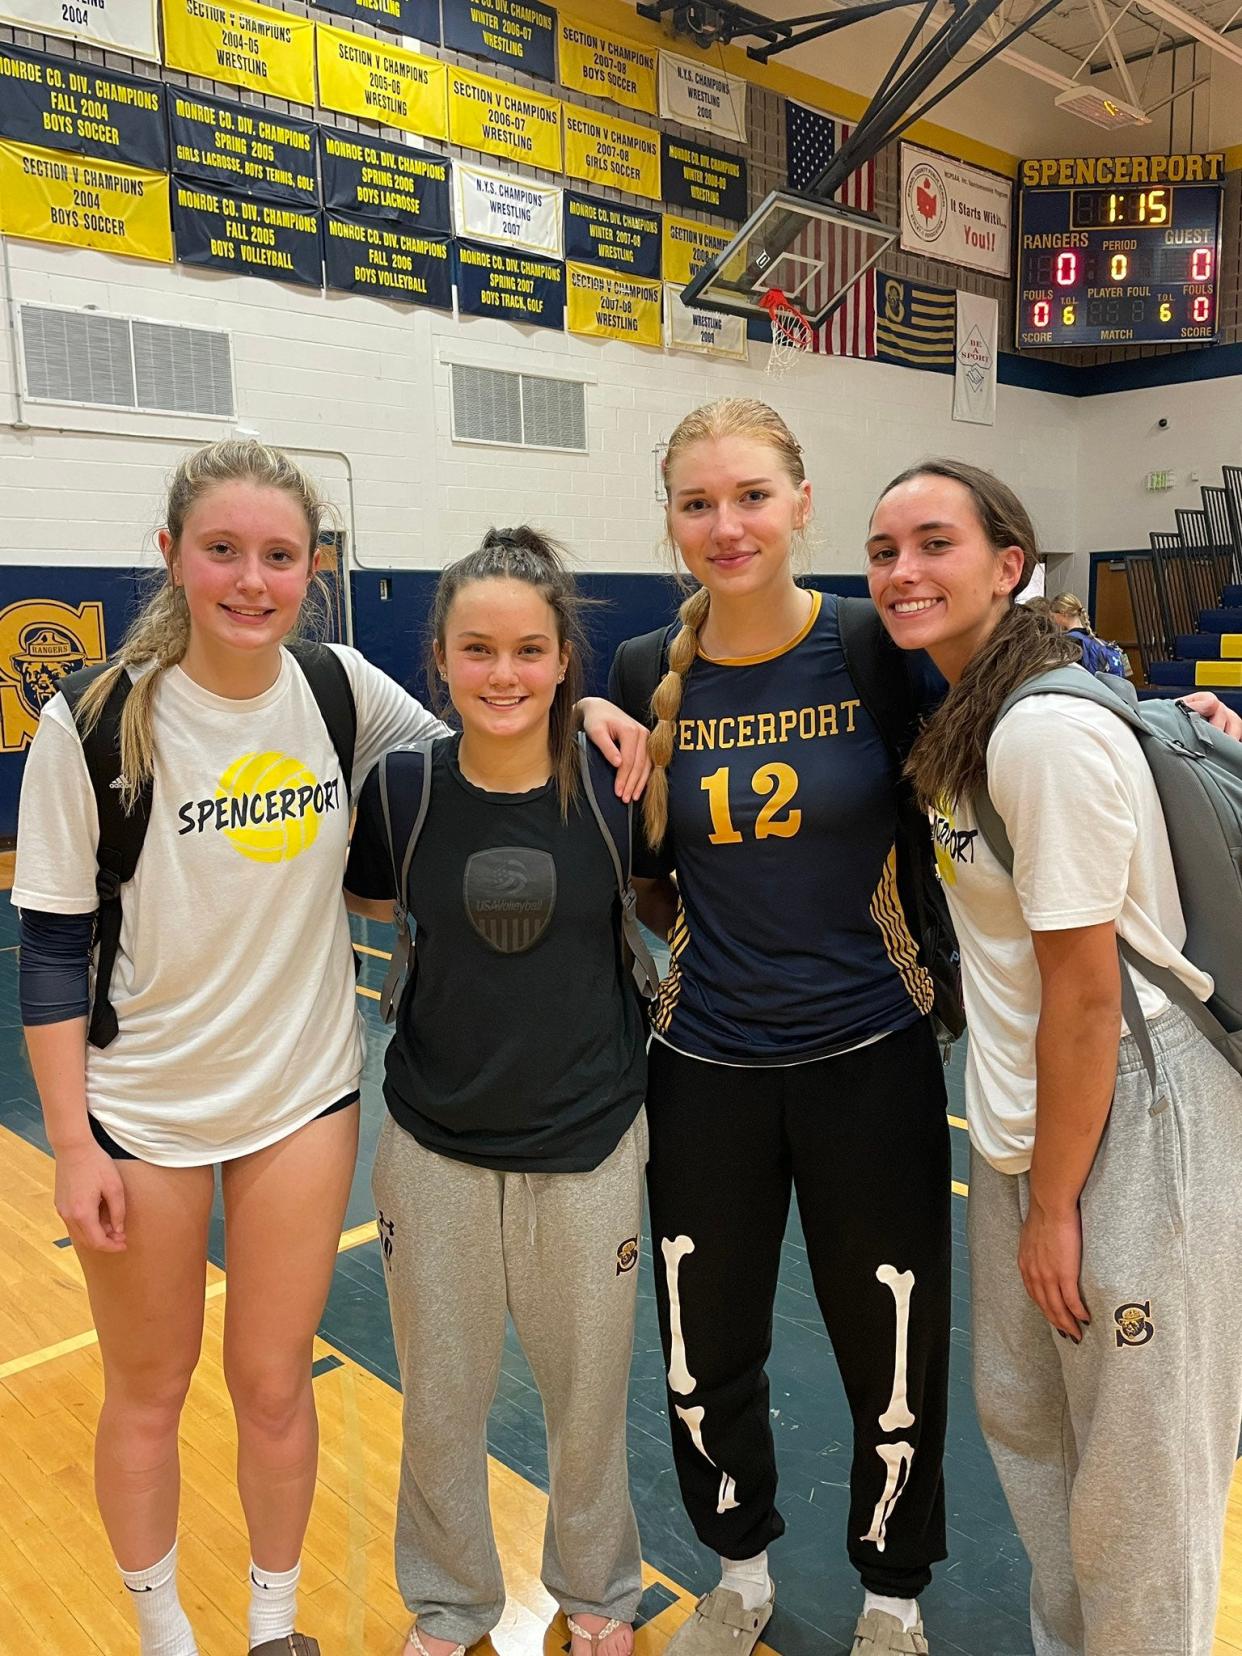 Spencerport's Molly McKinney, Brooke Endres, Cassandra Westphal and Molly Guzik led the Rangers to their first division title since 2019. The Rangers went 8-0 in Monroe County Division III.